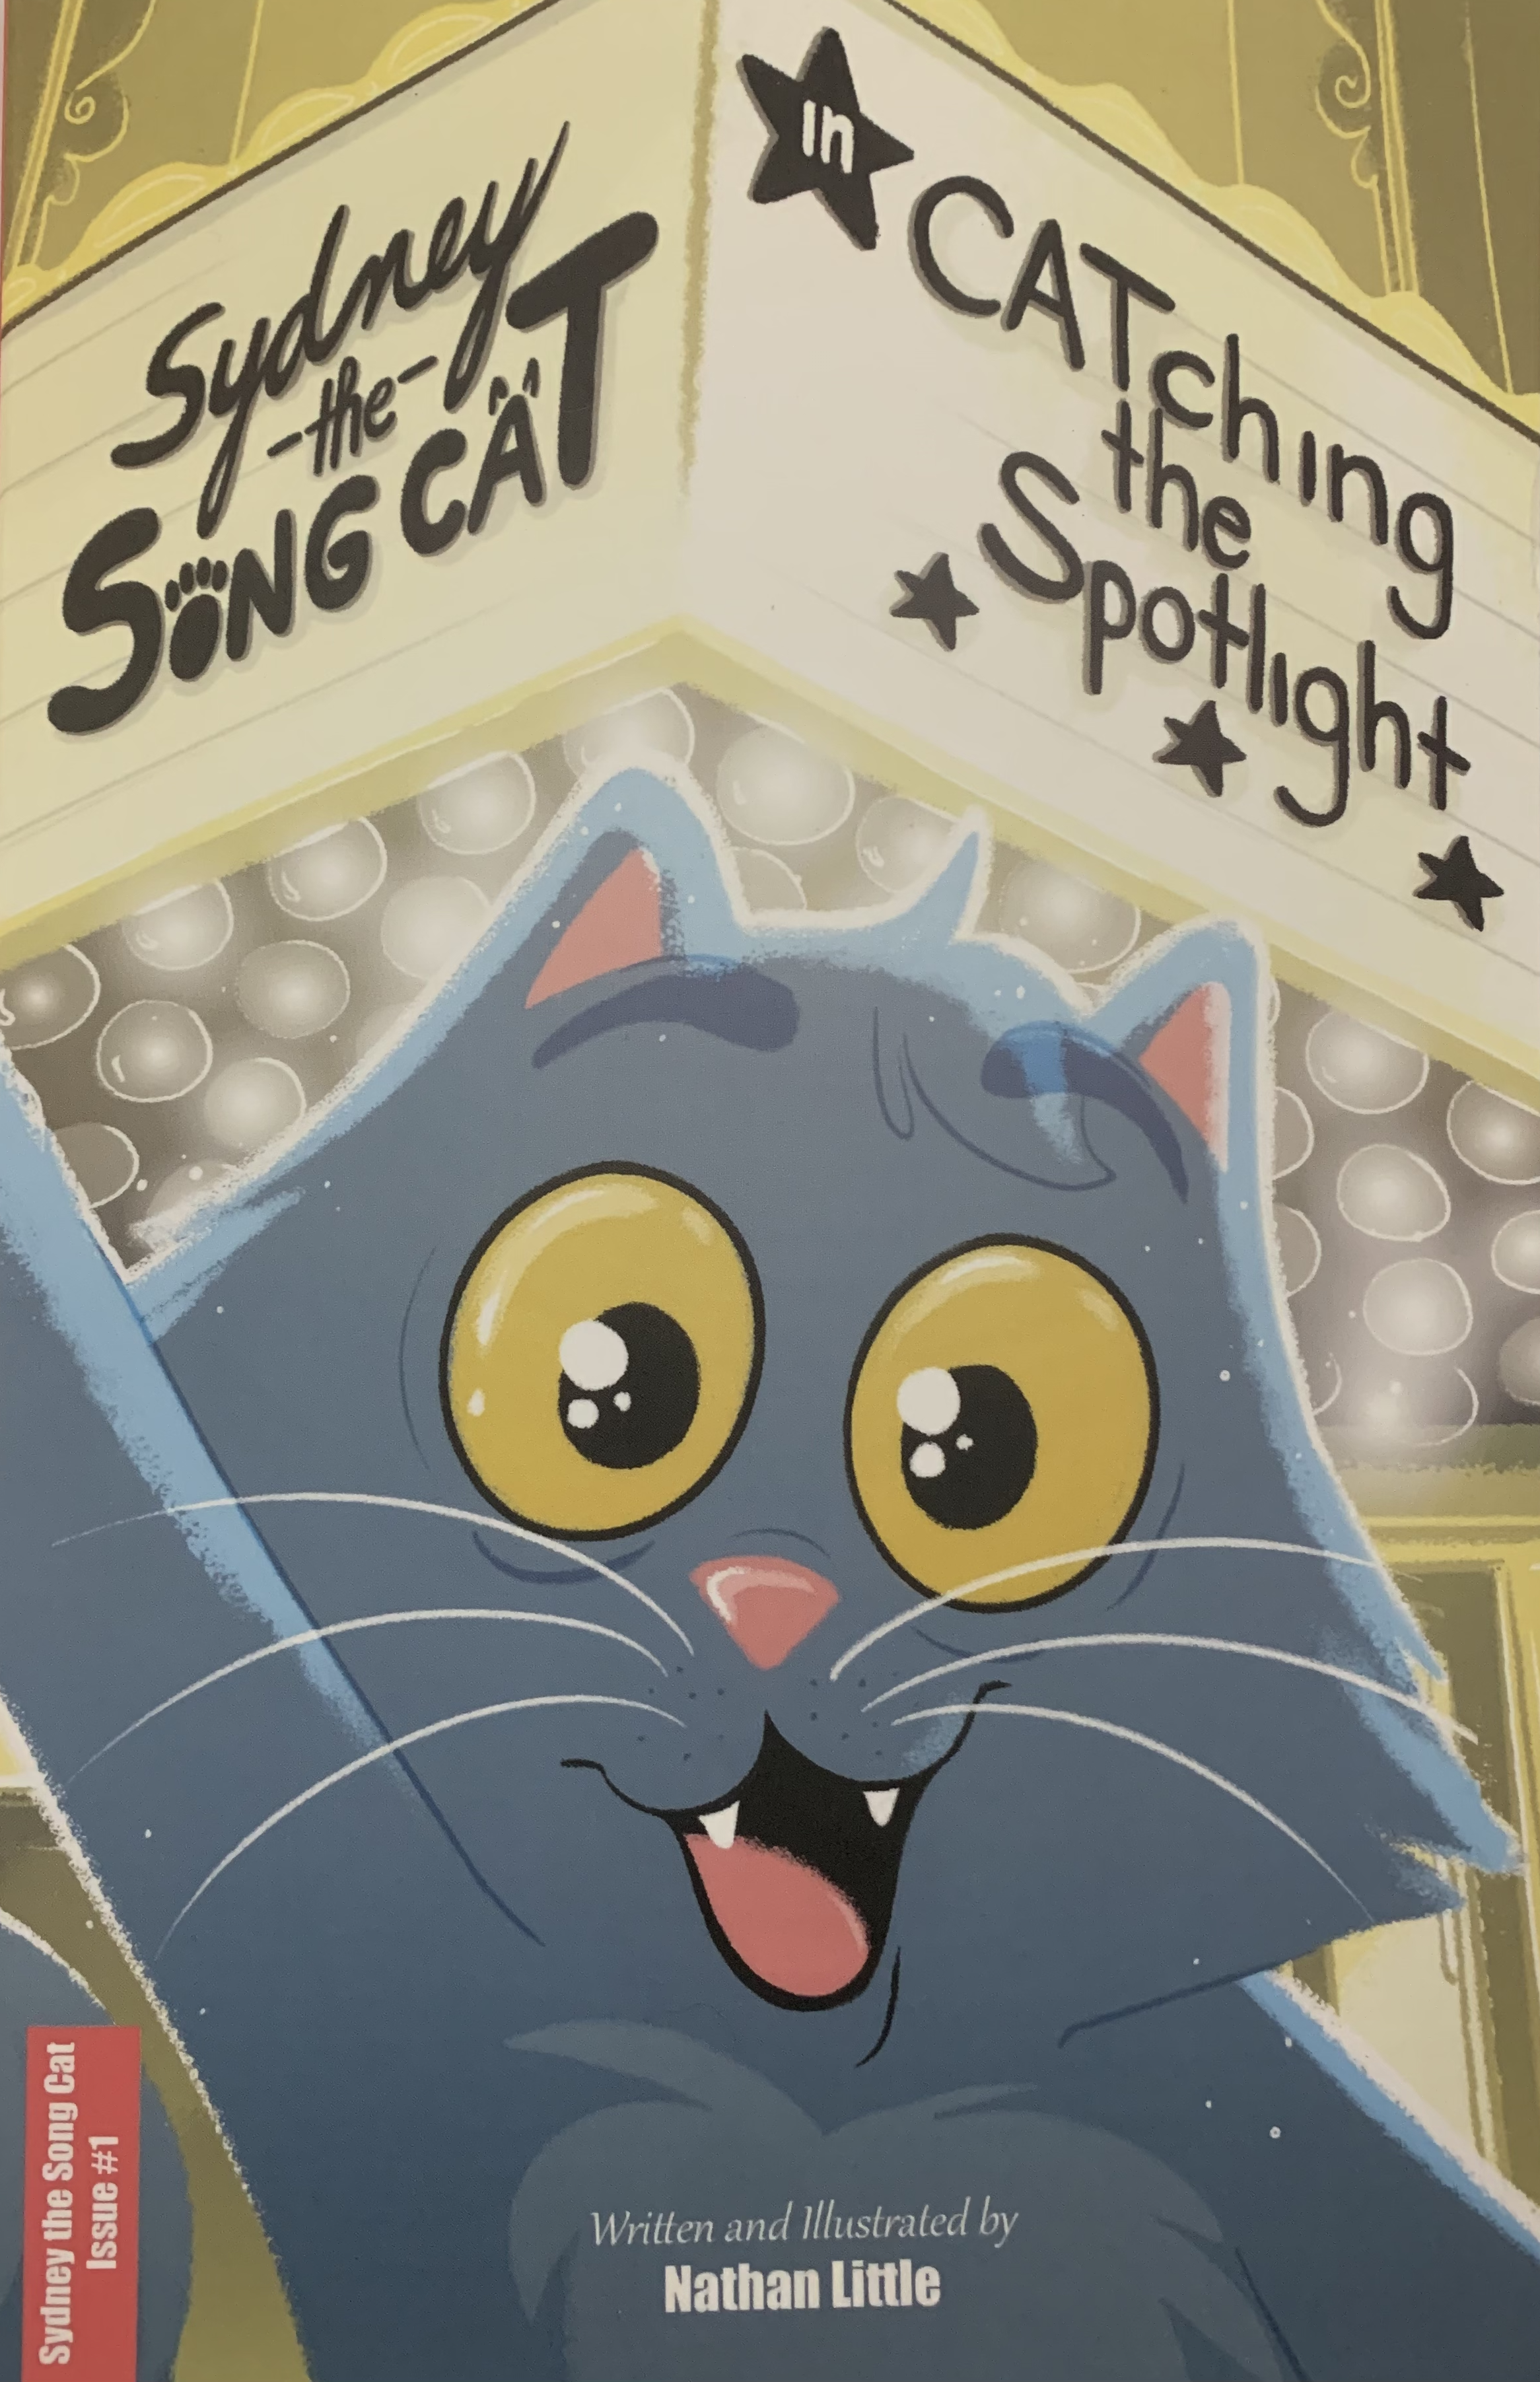 Nathan Little's cover for Syndey the Song Cat